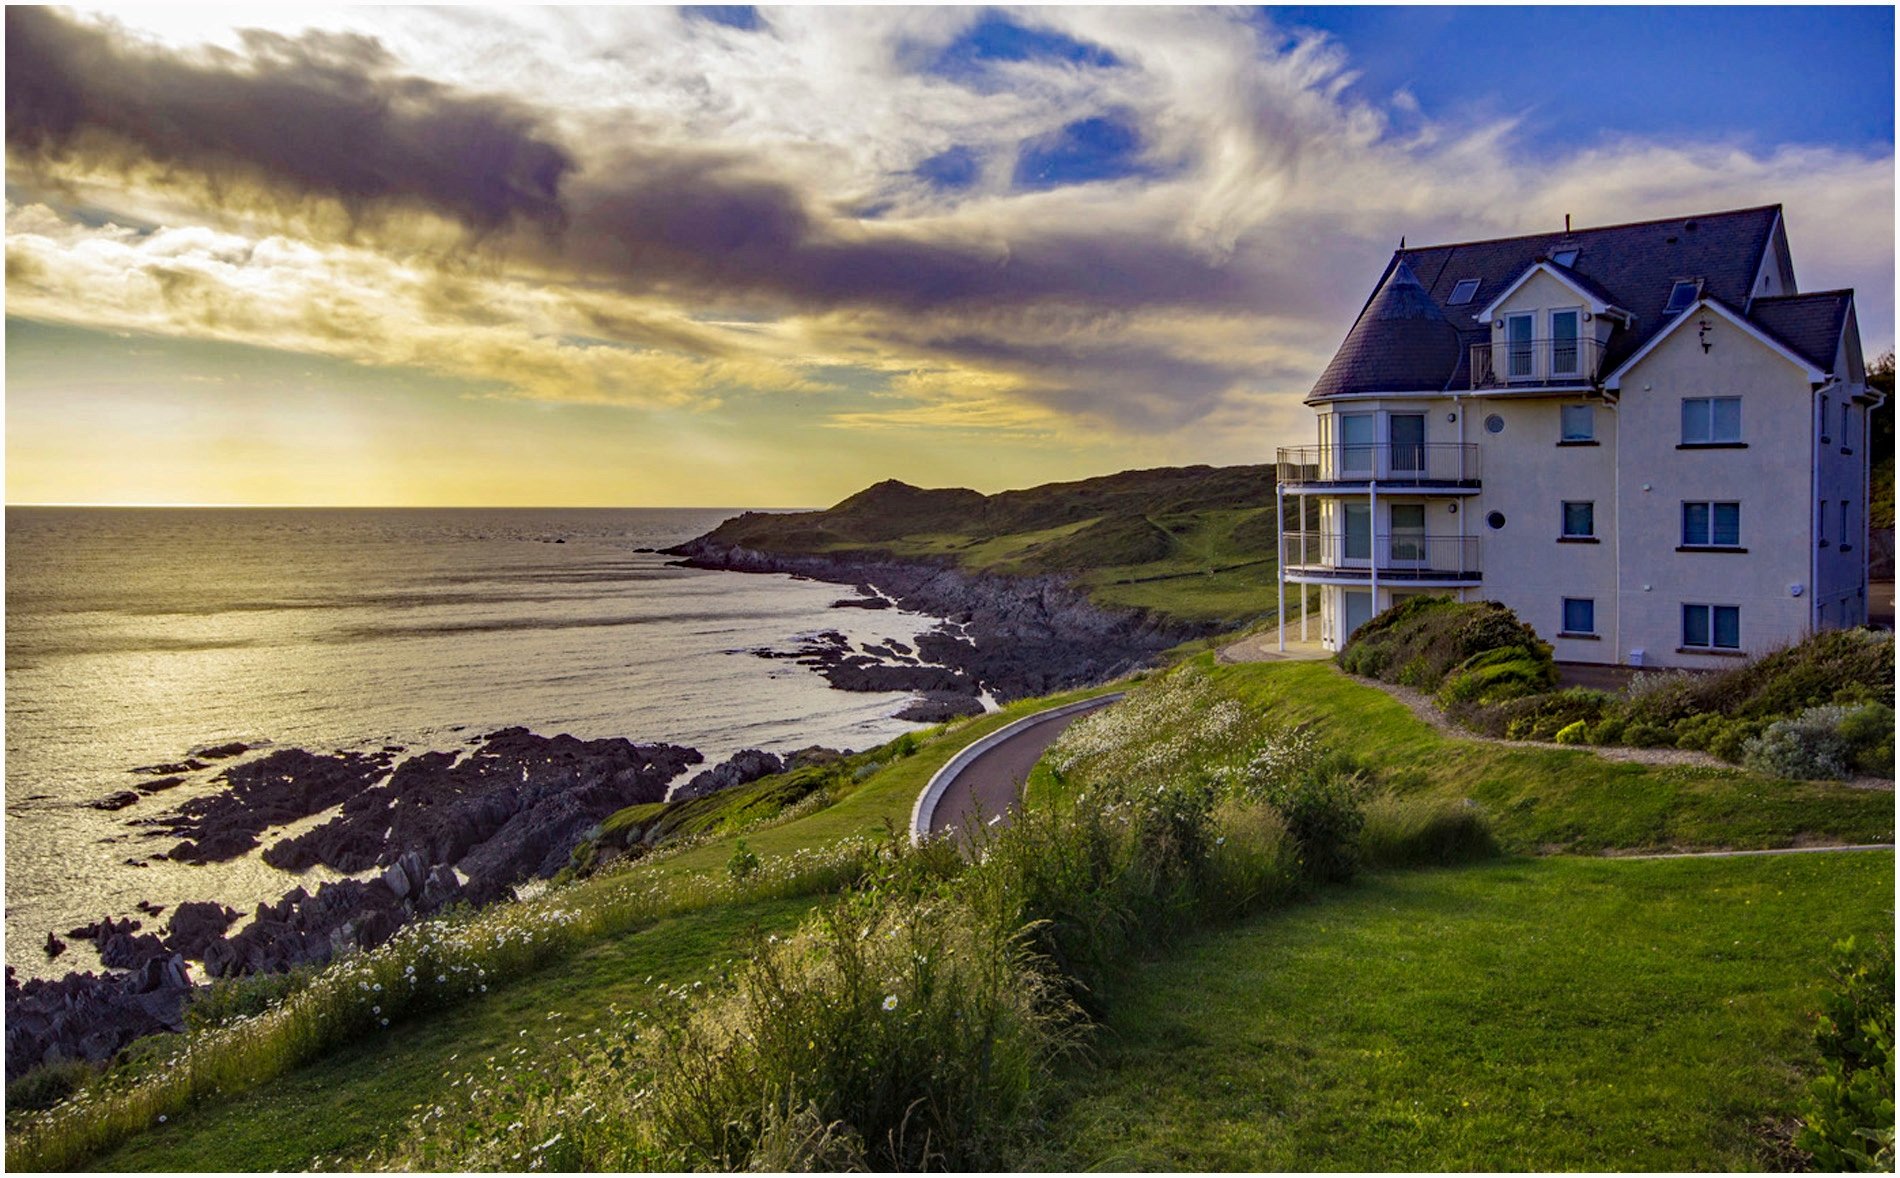 Woolacombe-Mote Point by Mike Peak